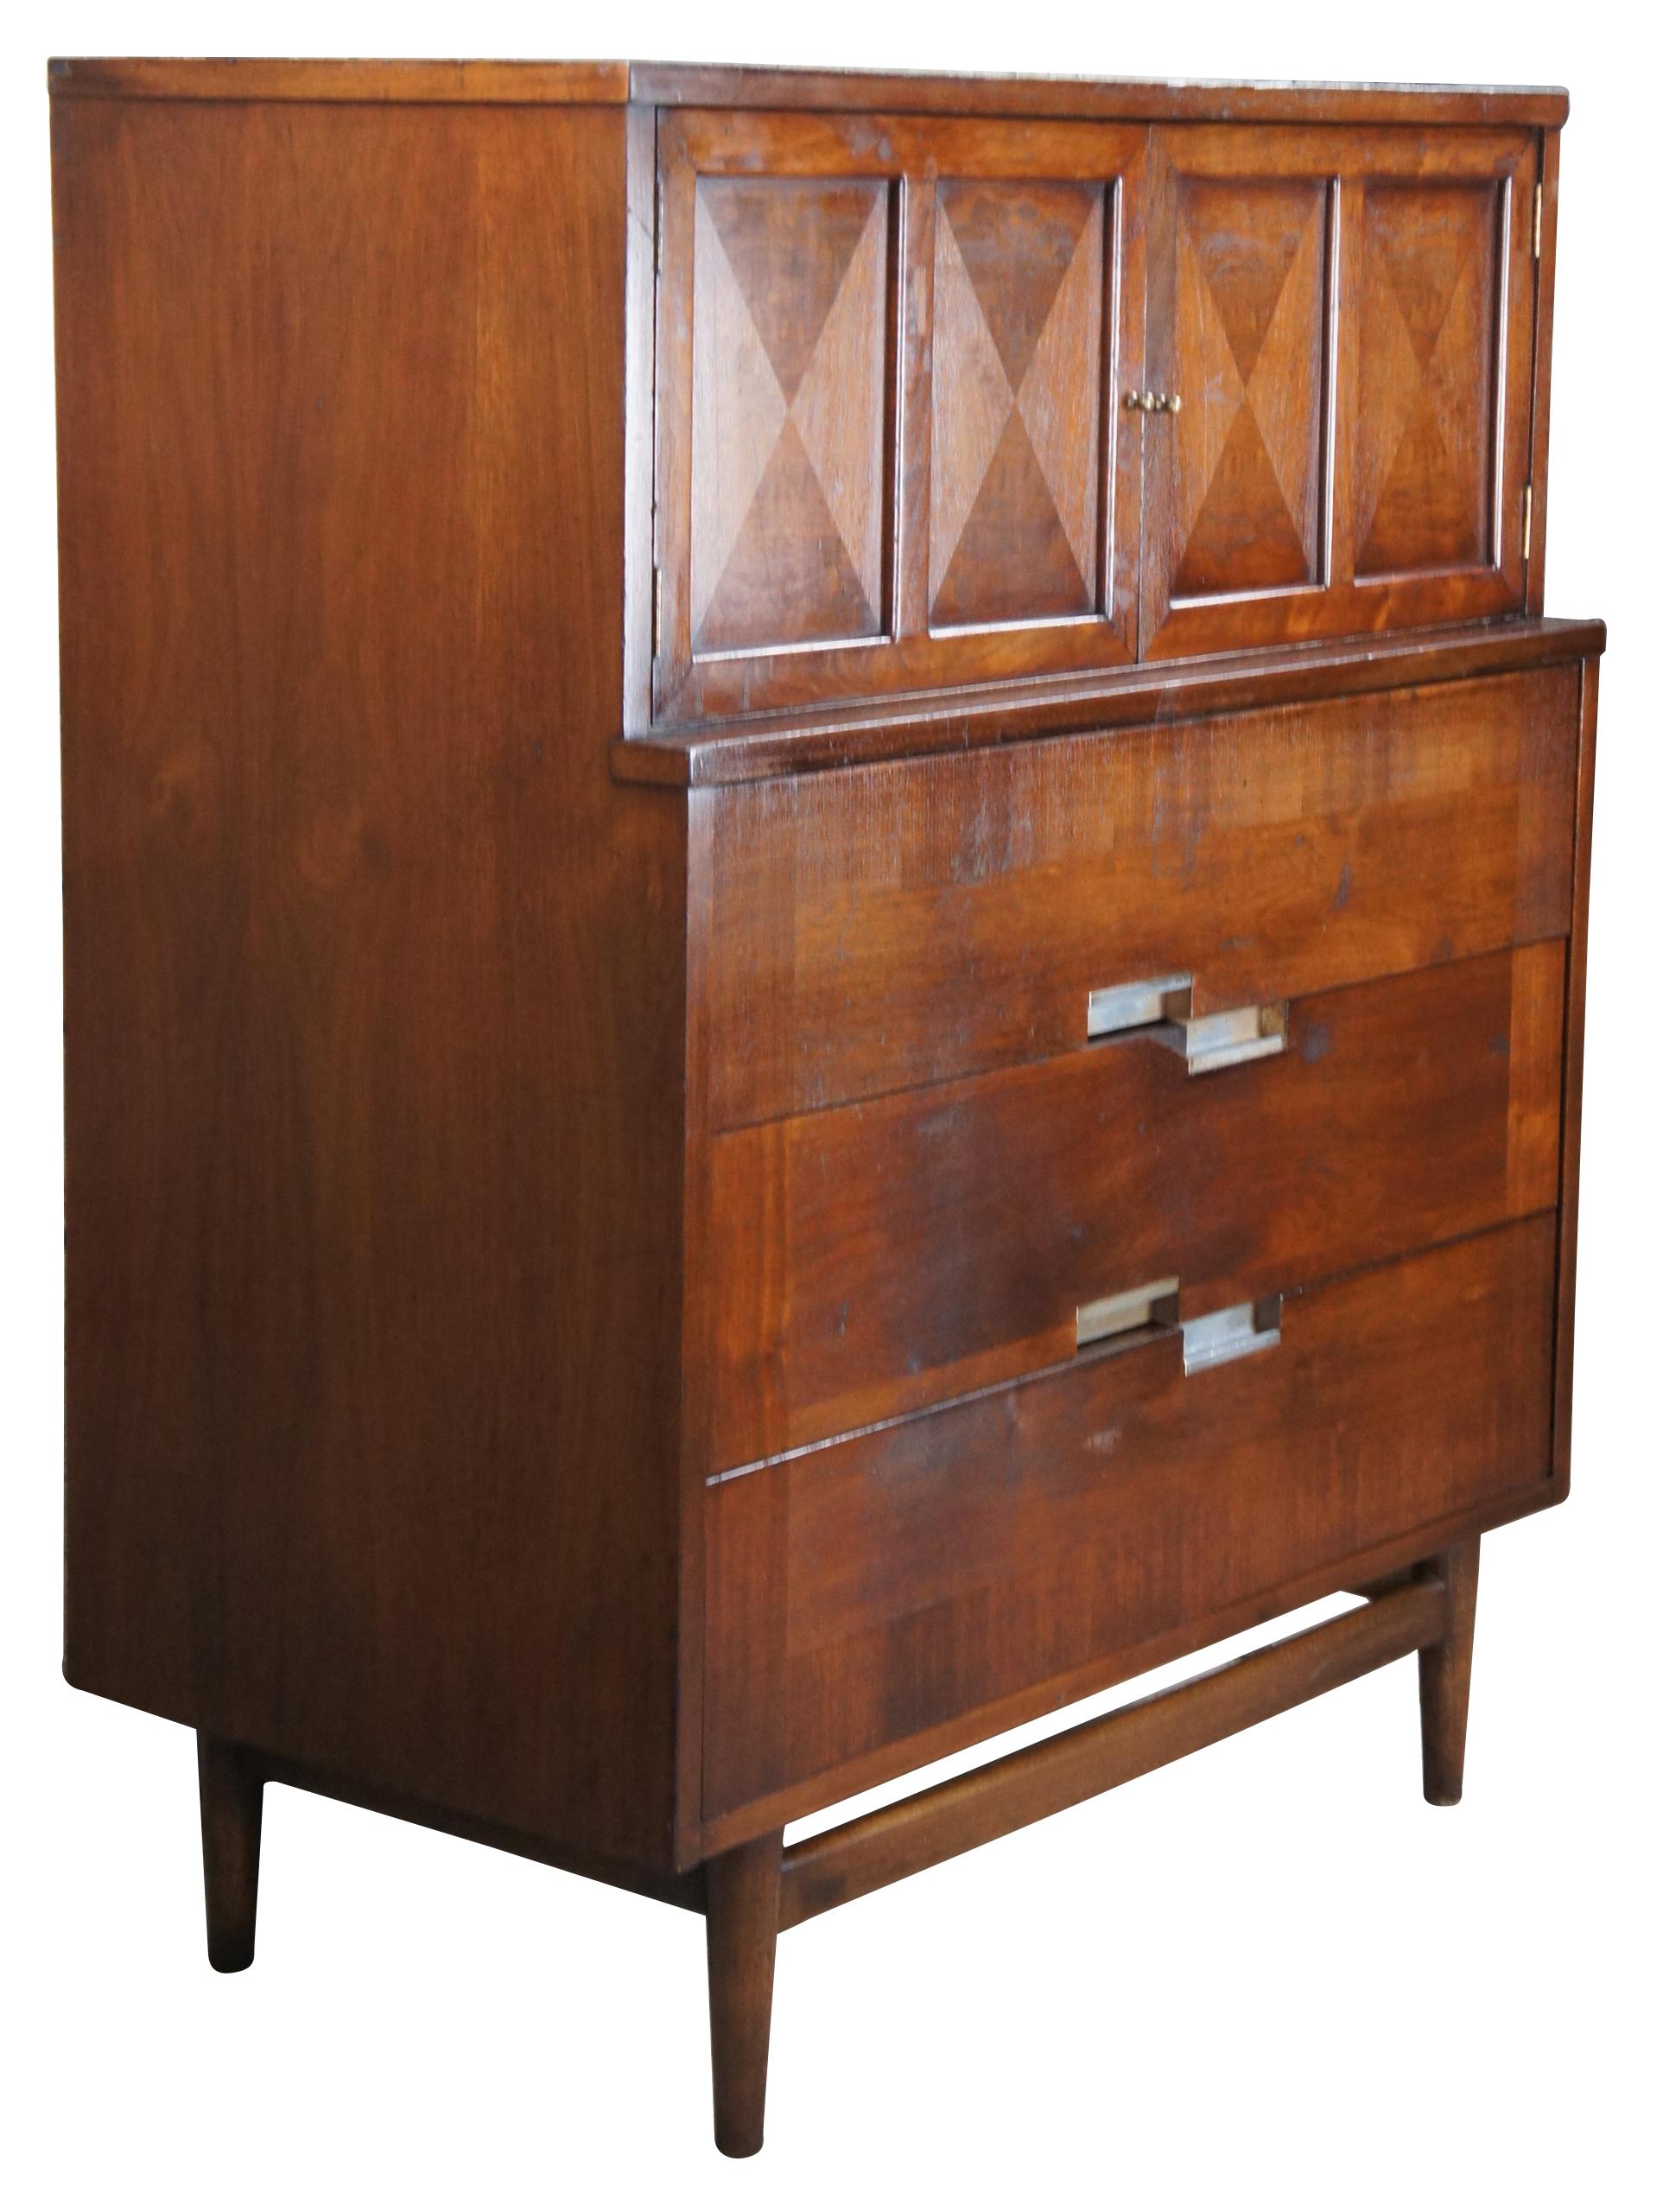 Mid-Century Modern Accord Bachelor Chest of Drawers designed by Merton Gershun, American (1909-1989) for American of Martinsville. Made of walnut featuring inset X top with upper bookmatch panel cabinet that opens to two drawers, over three more